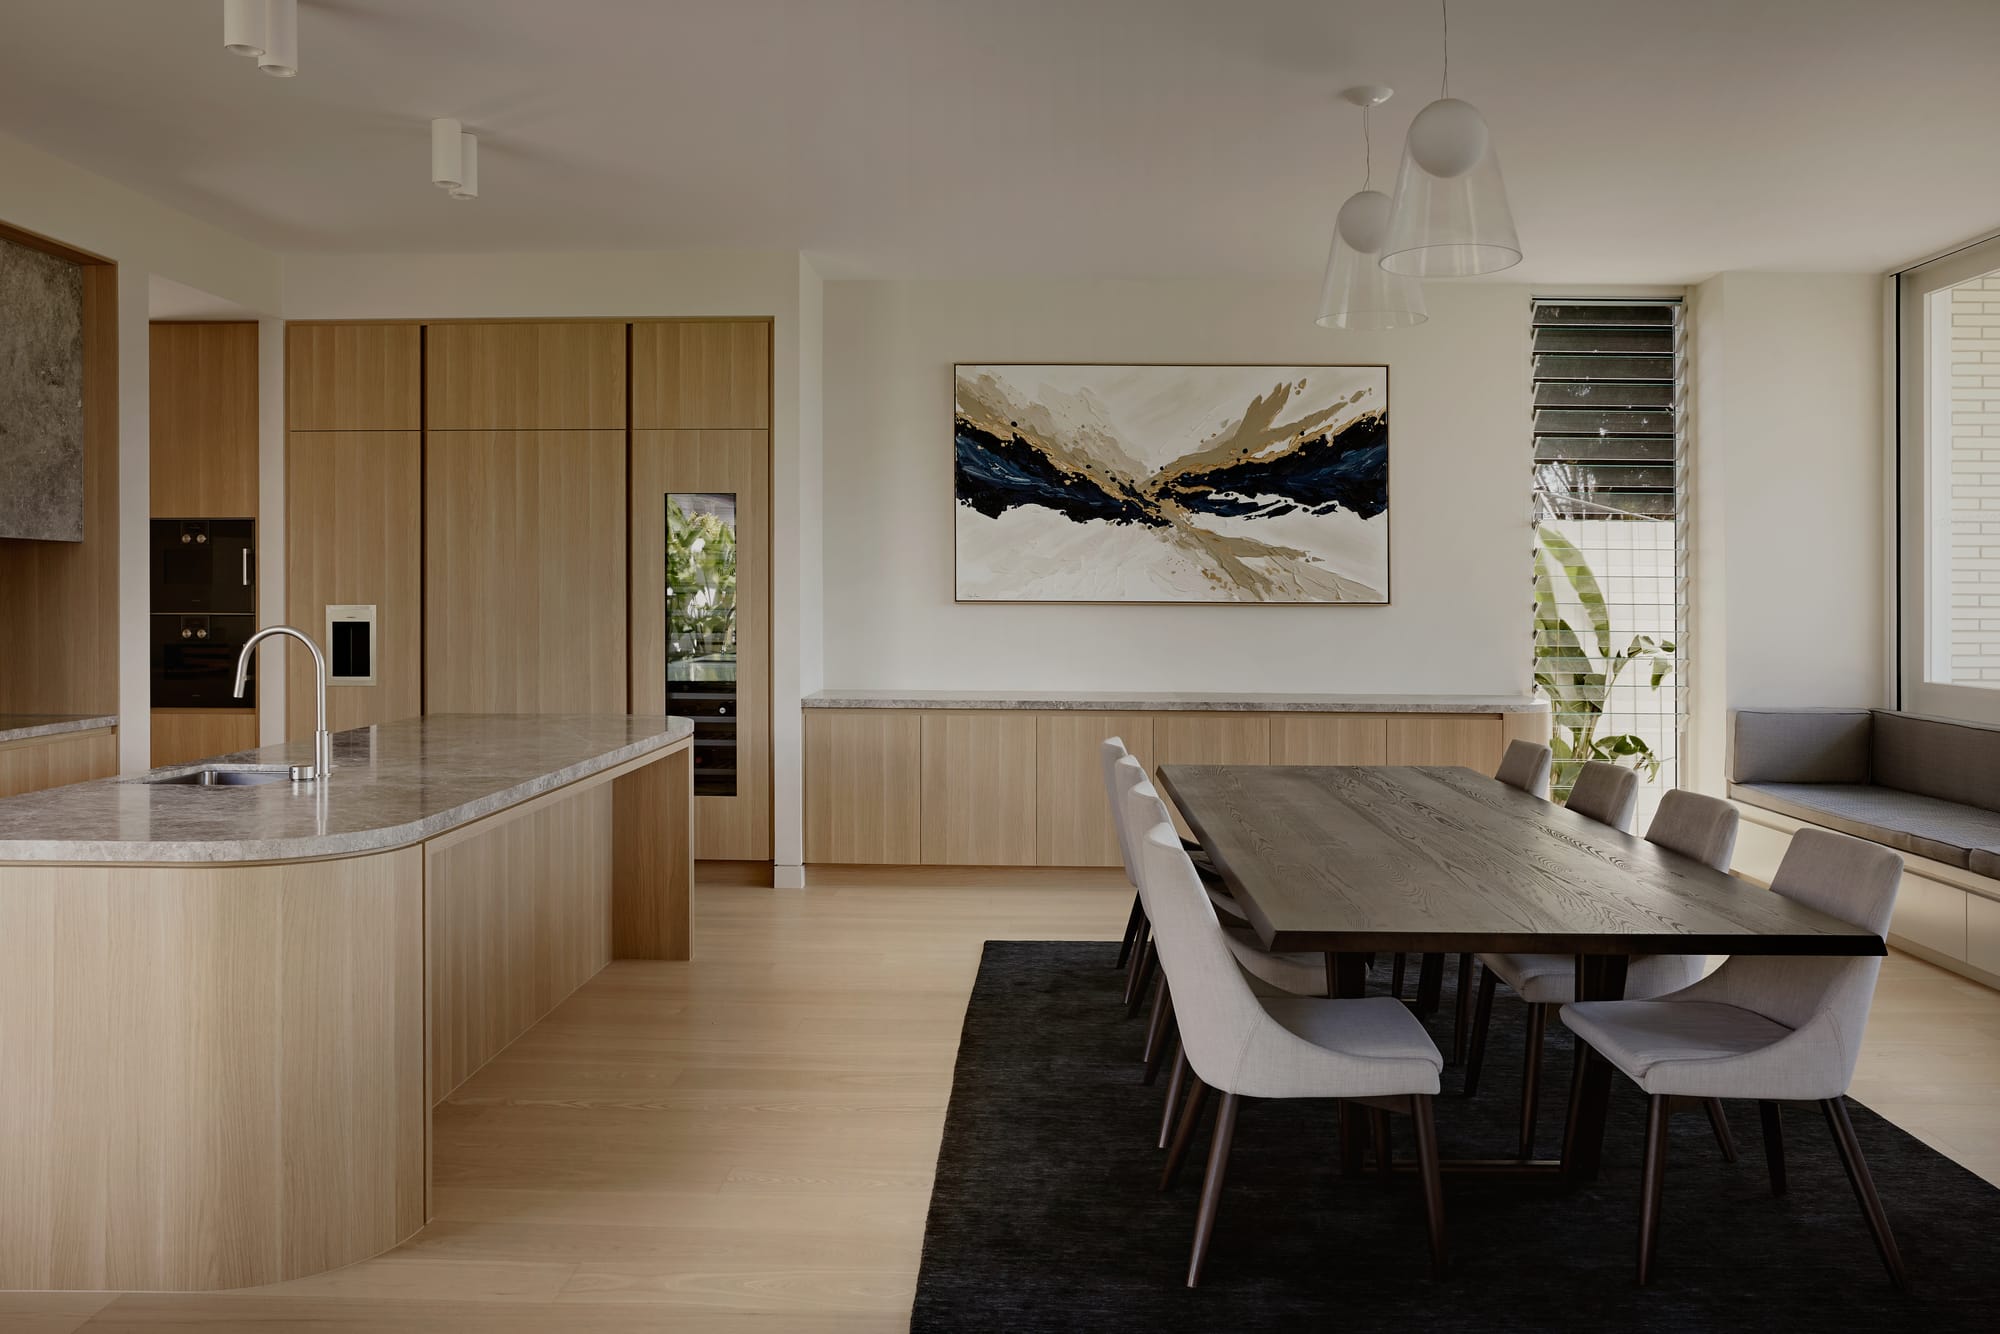 Hill Courtyard House by Kelder Architects. Photography by Brock Beazley Photography. Kitchen and dining area with timber floors, benches and joinery. Dark timber table with white chairs on black rug. Abstract painting. 